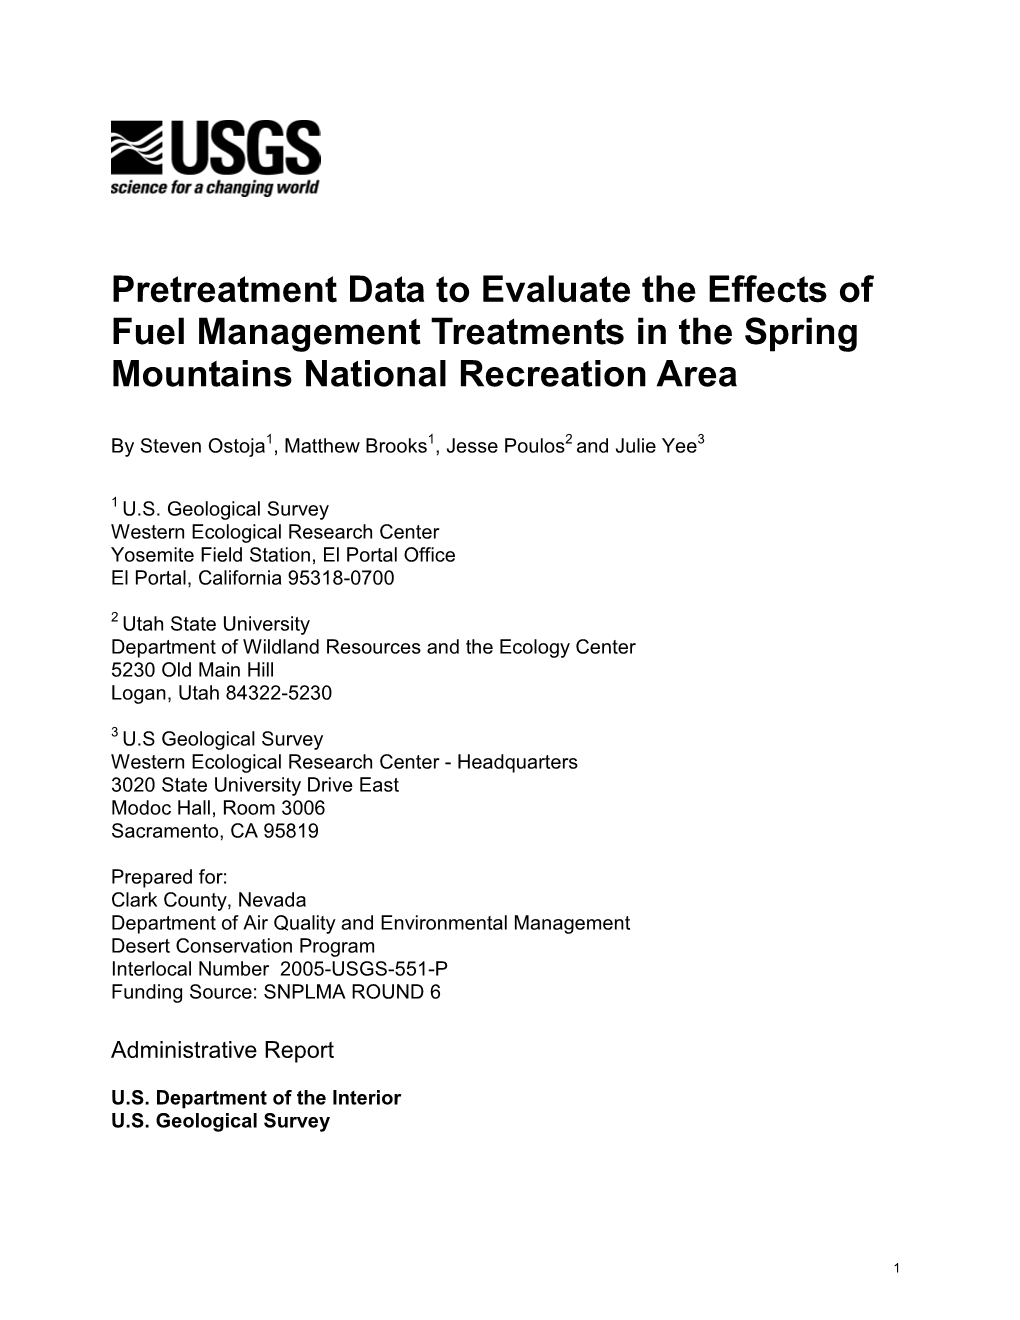 Pretreatment Data to Evaluate the Effects of Fuel Management Treatments in the Spring Mountains National Recreation Area